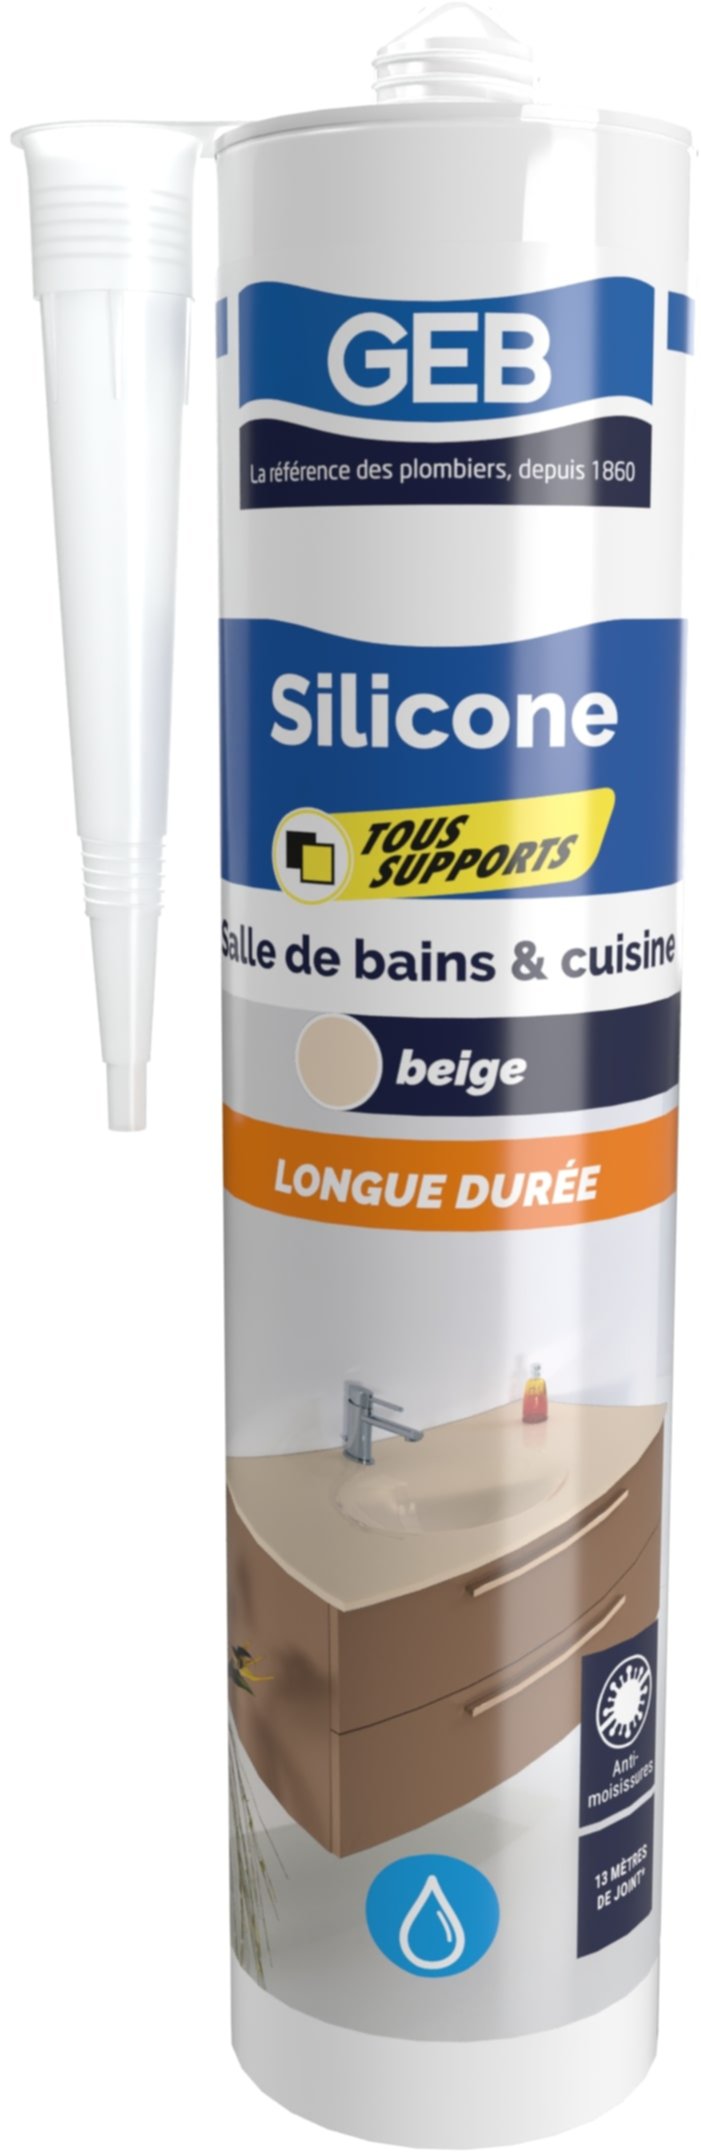 Mastic Silicone Cuisine&Bain Tous Supports Beige Sable 280ml - GEB